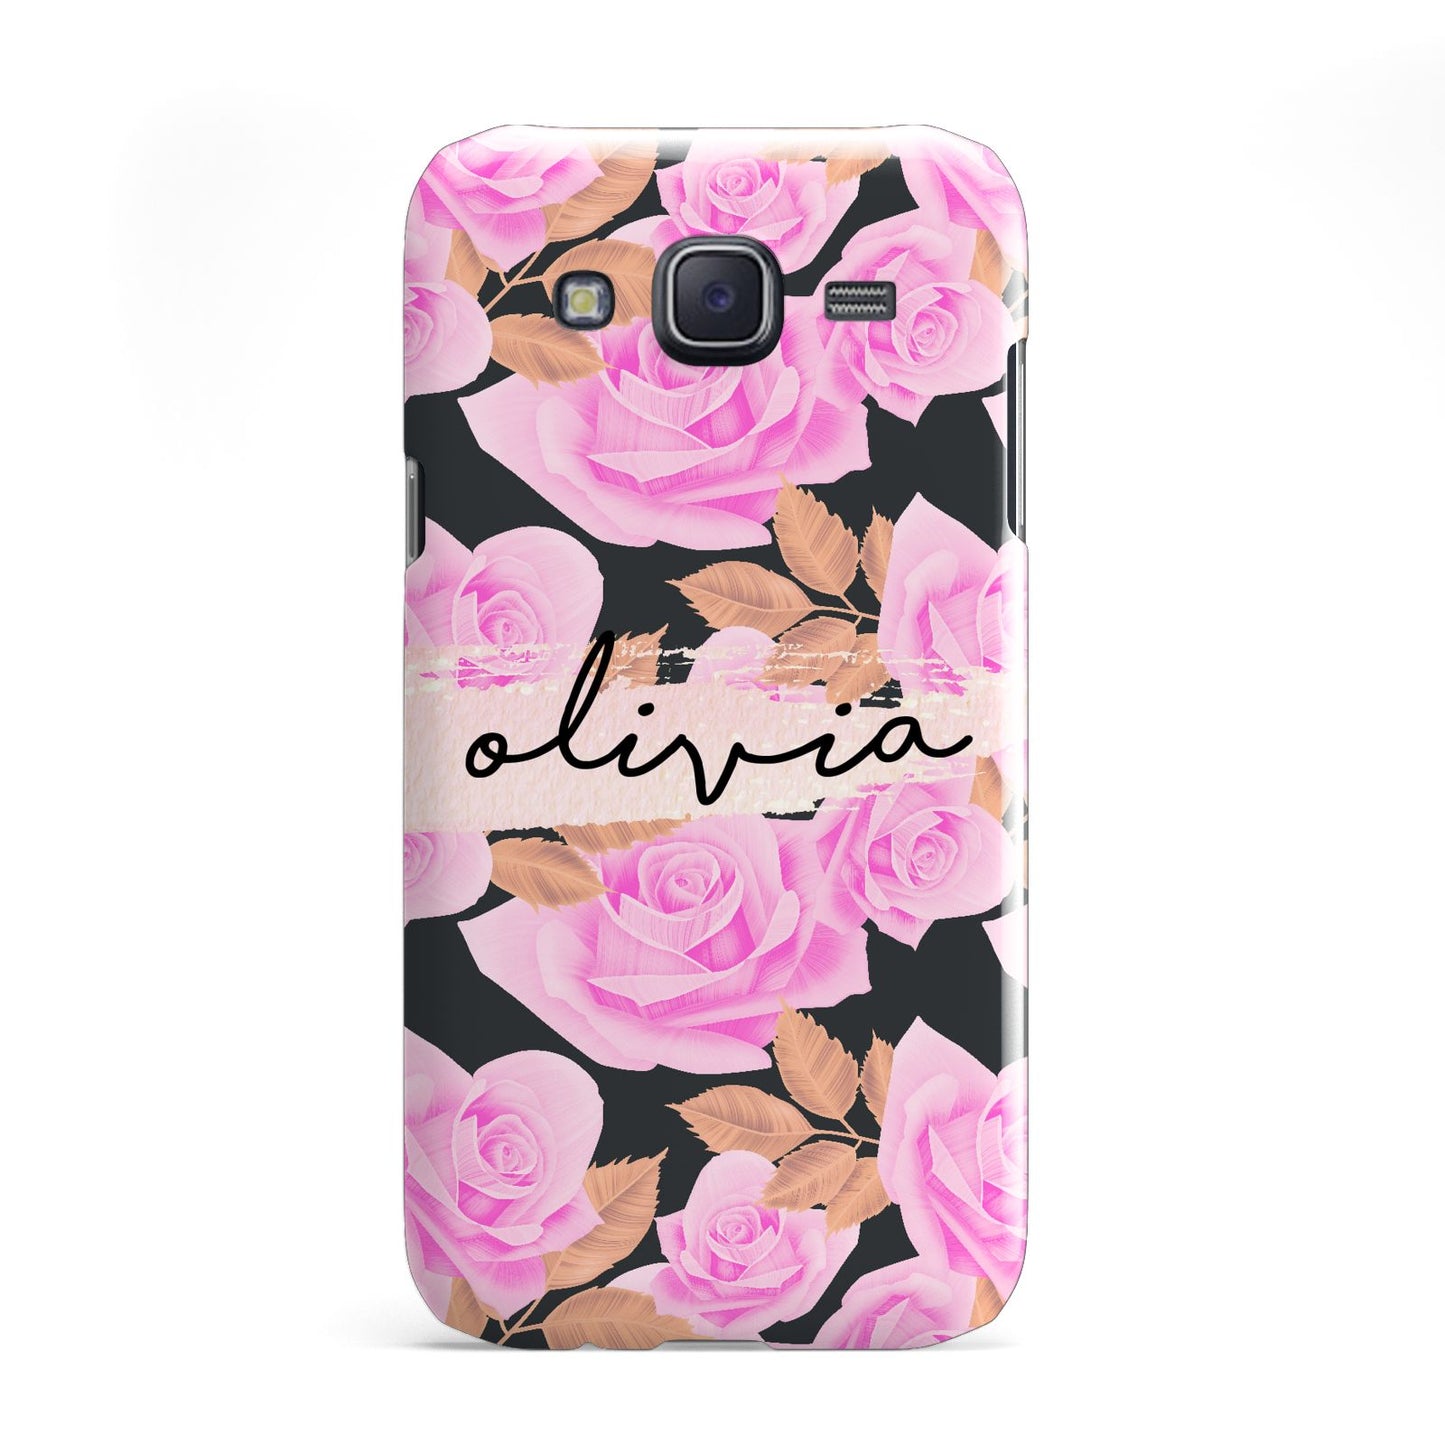 Personalised Floral Pink Roses Samsung Galaxy J5 Case